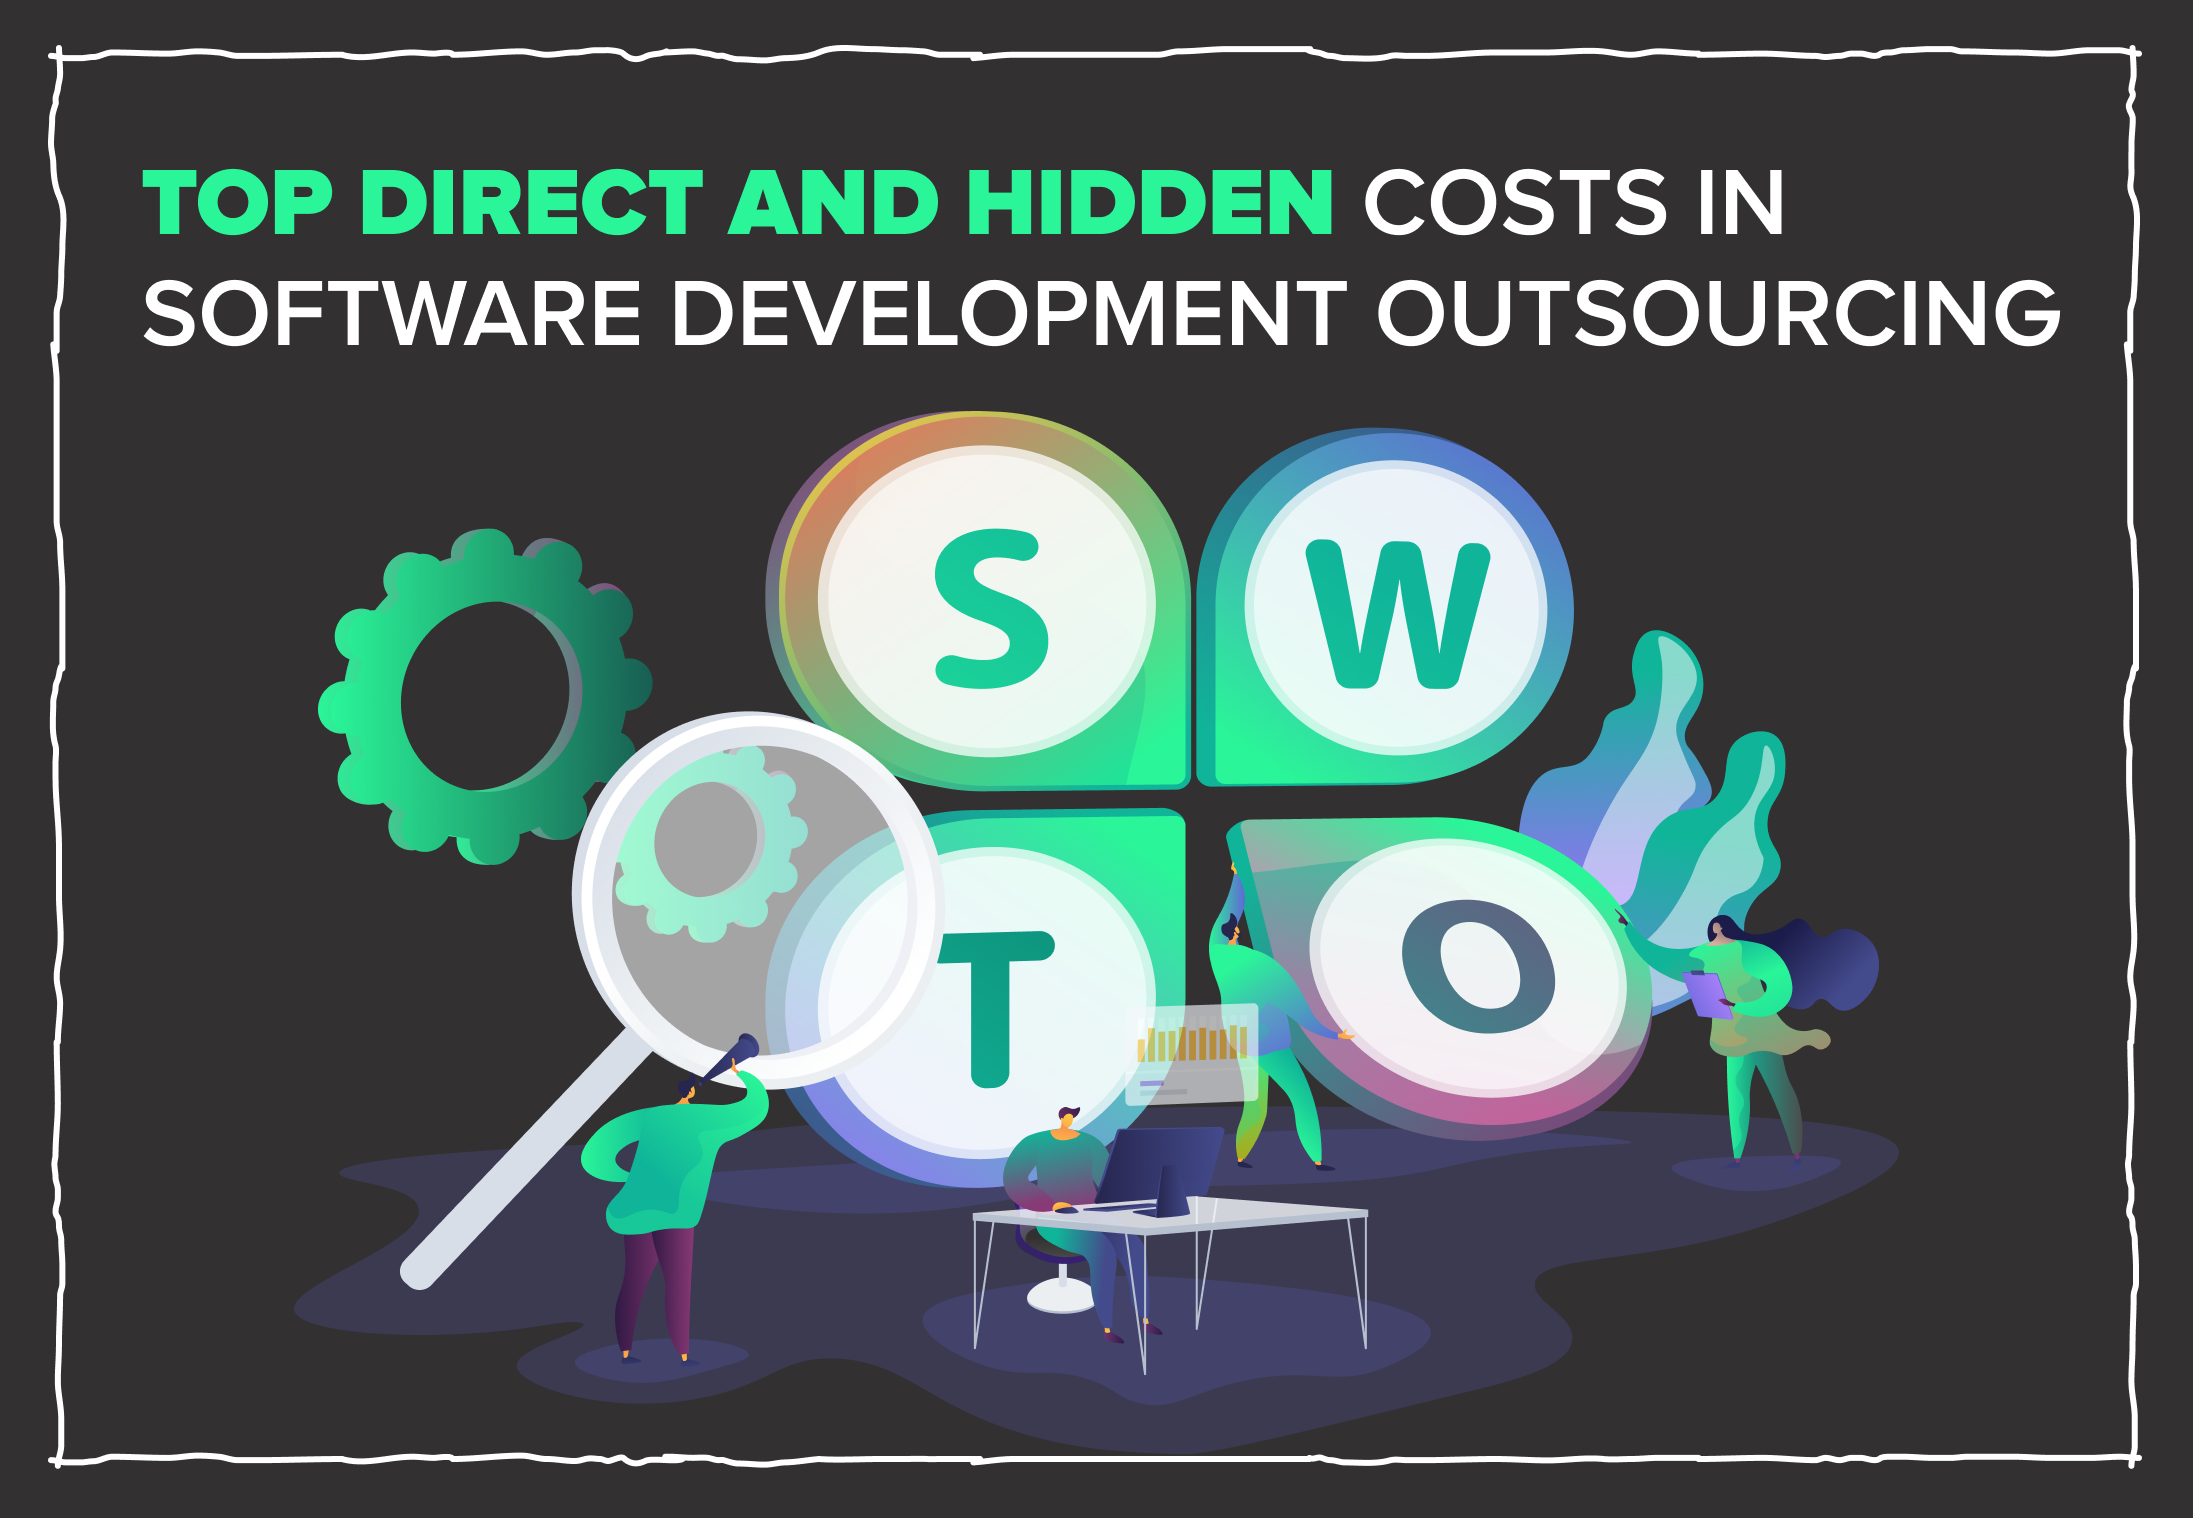 CodeRiders software development company gives time and money estimates after reviewing the software outsourcing project and also points out possible hidden costs of offshore outsourcing that are not included in our estimates